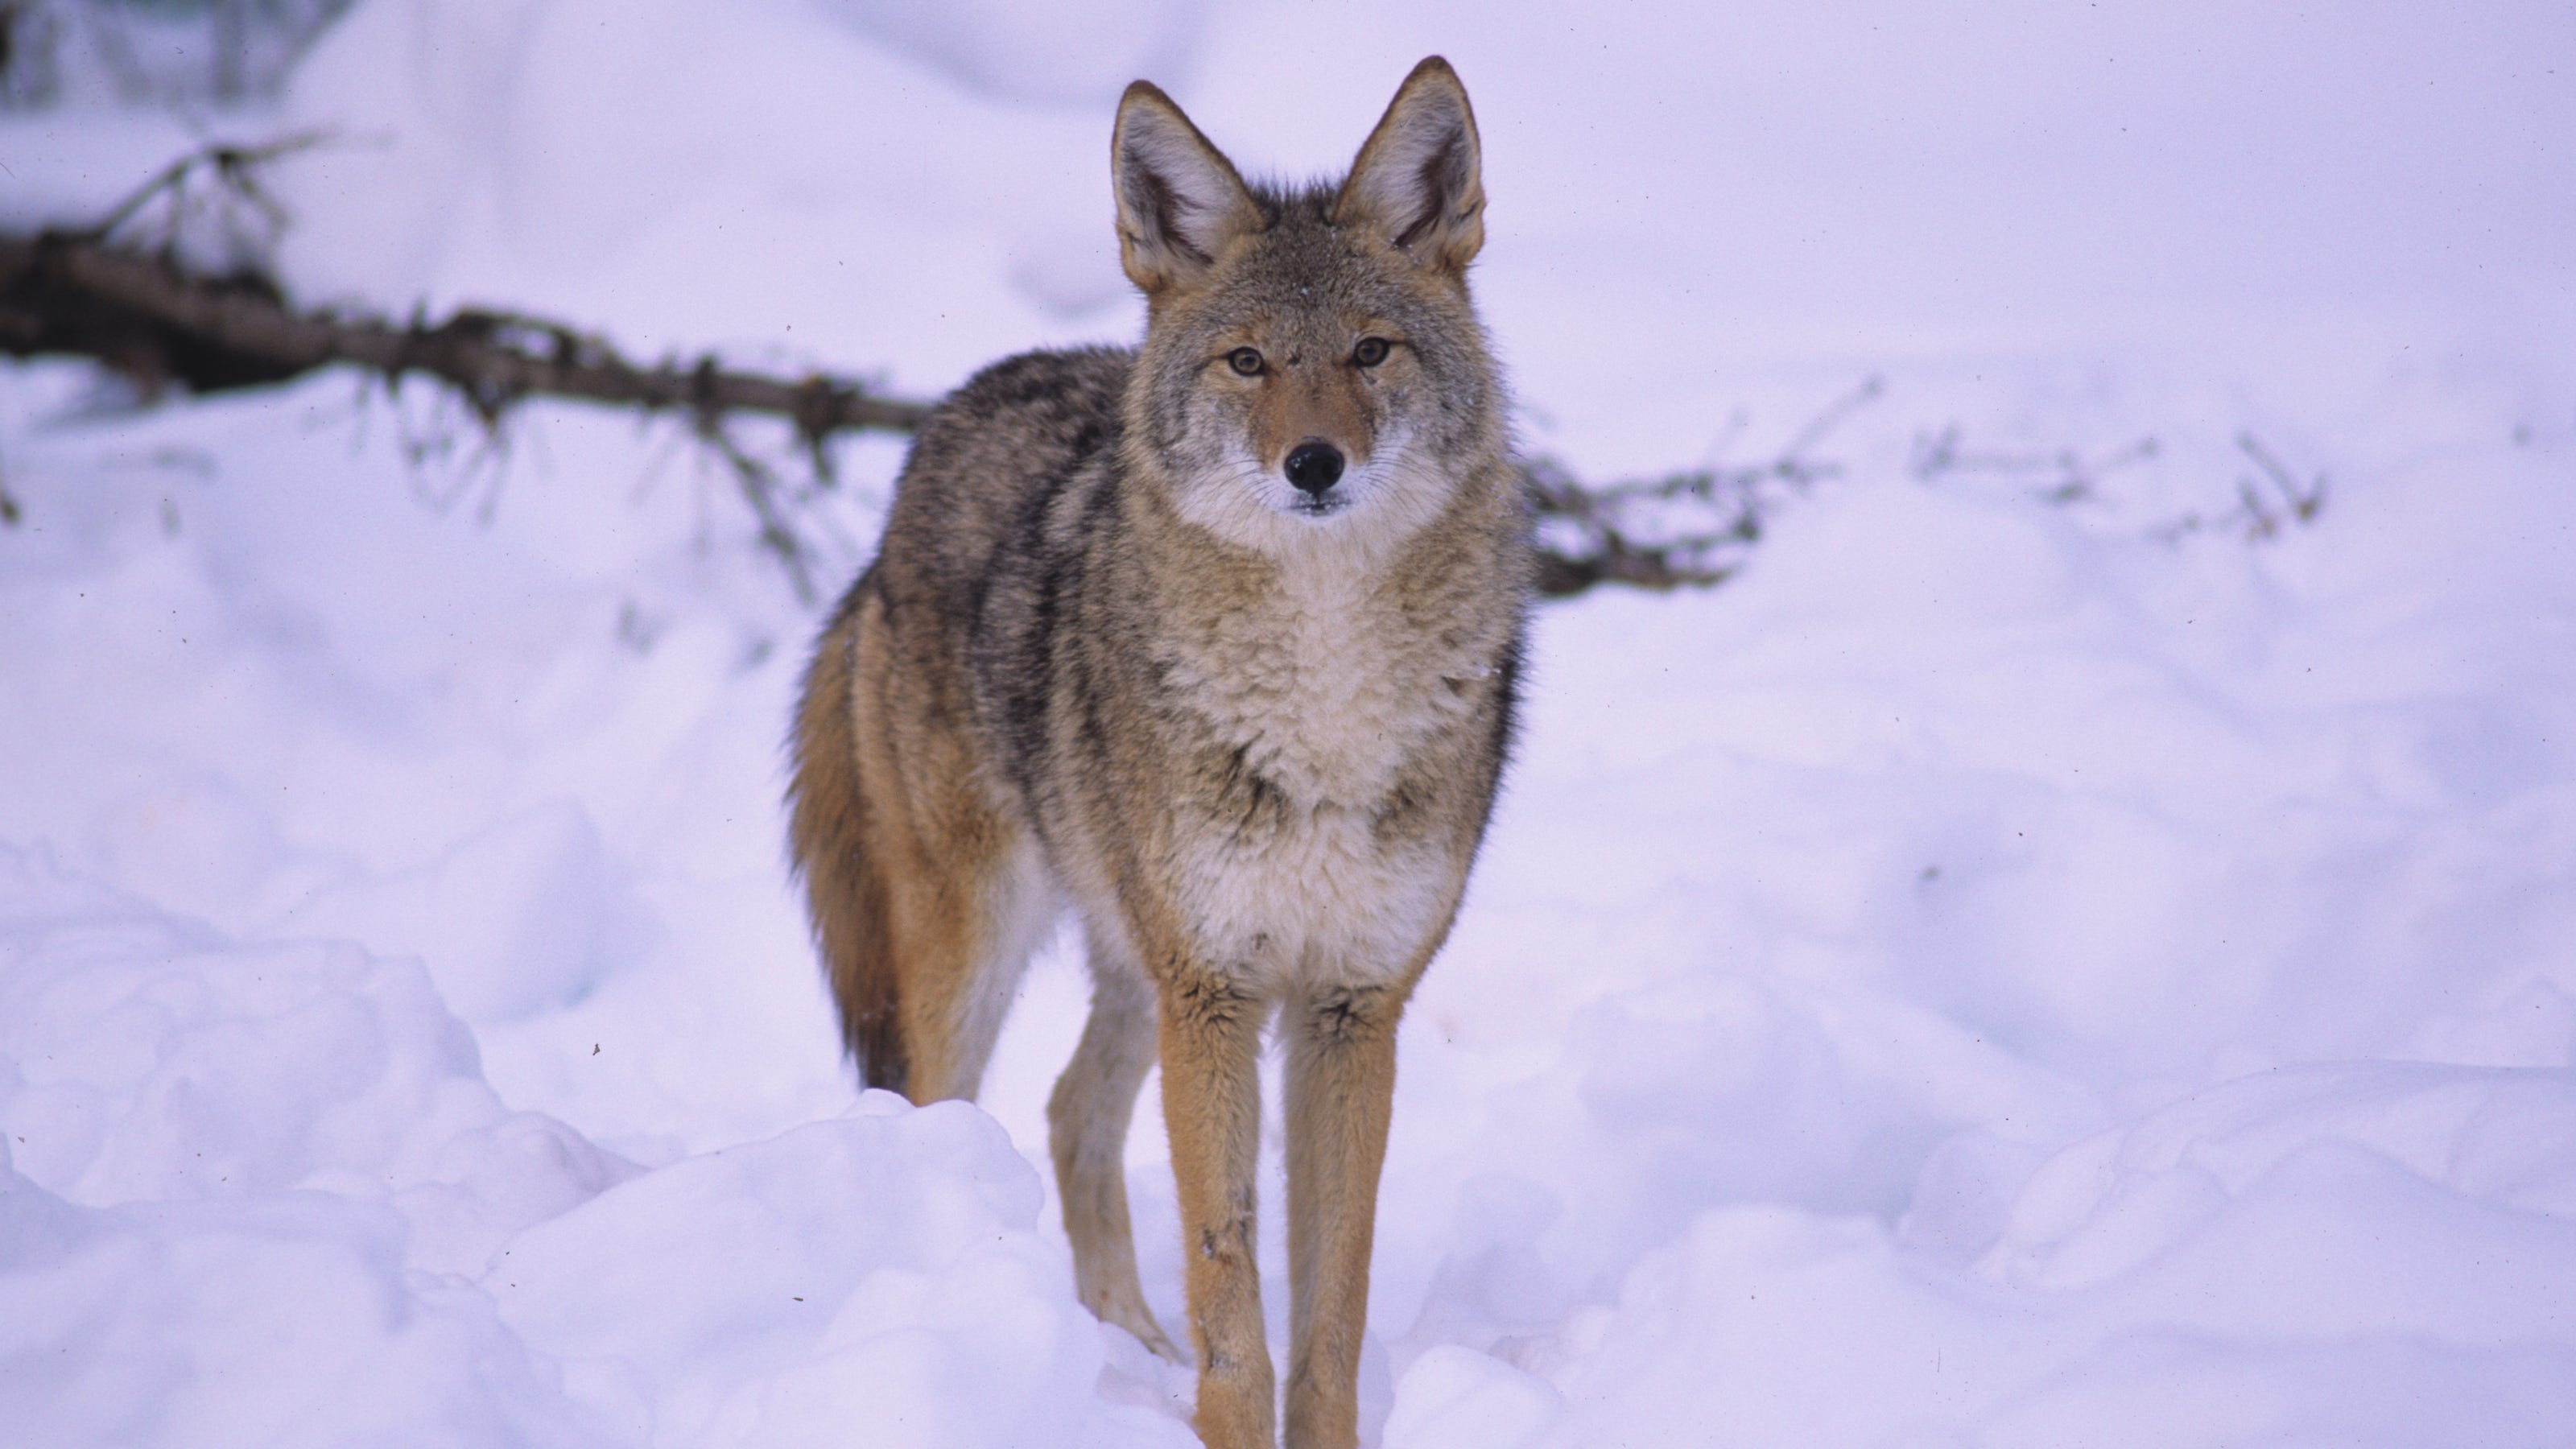 Coyotes are increasing in numbers across New York